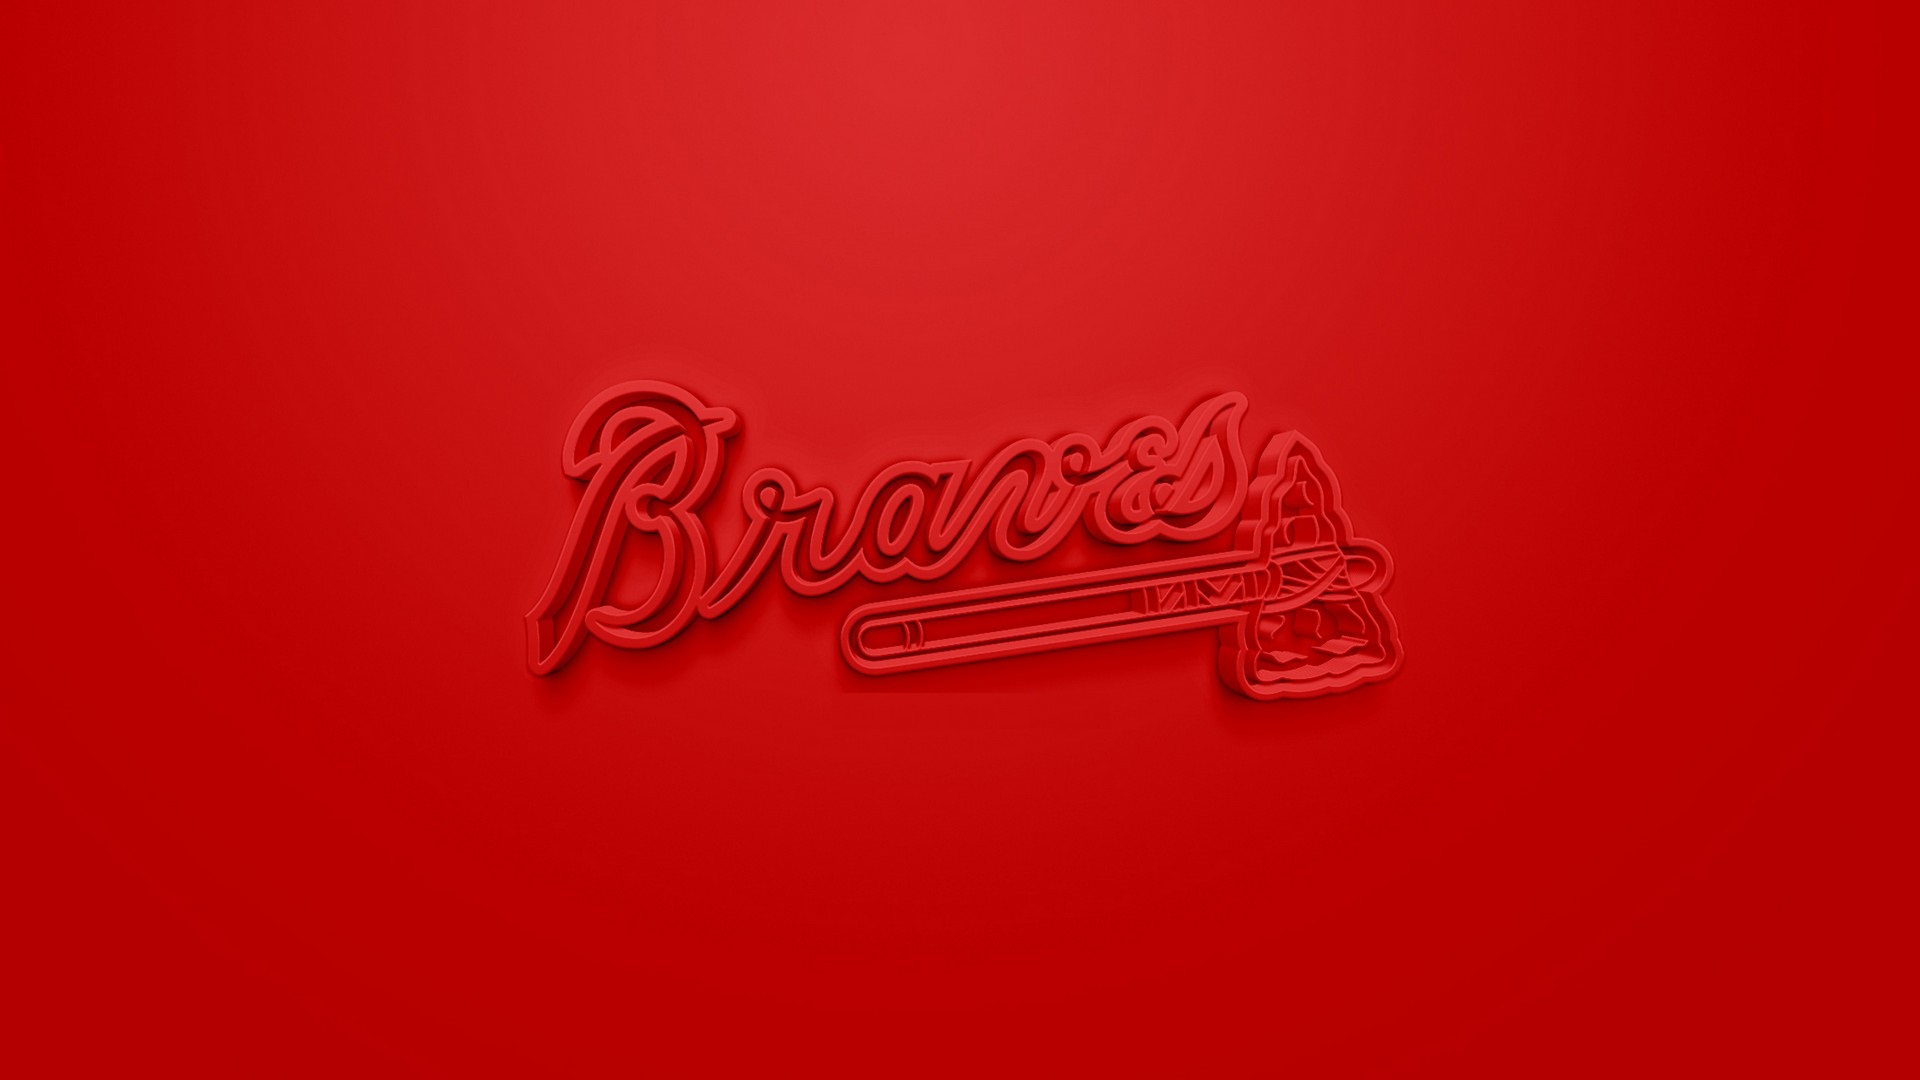 Atlanta Braves Backgrounds HD With high-resolution 1920X1080 pixel. You can use this wallpaper for Mac Desktop Wallpaper, Laptop Screensavers, Android Wallpapers, Tablet or iPhone Home Screen and another mobile phone device